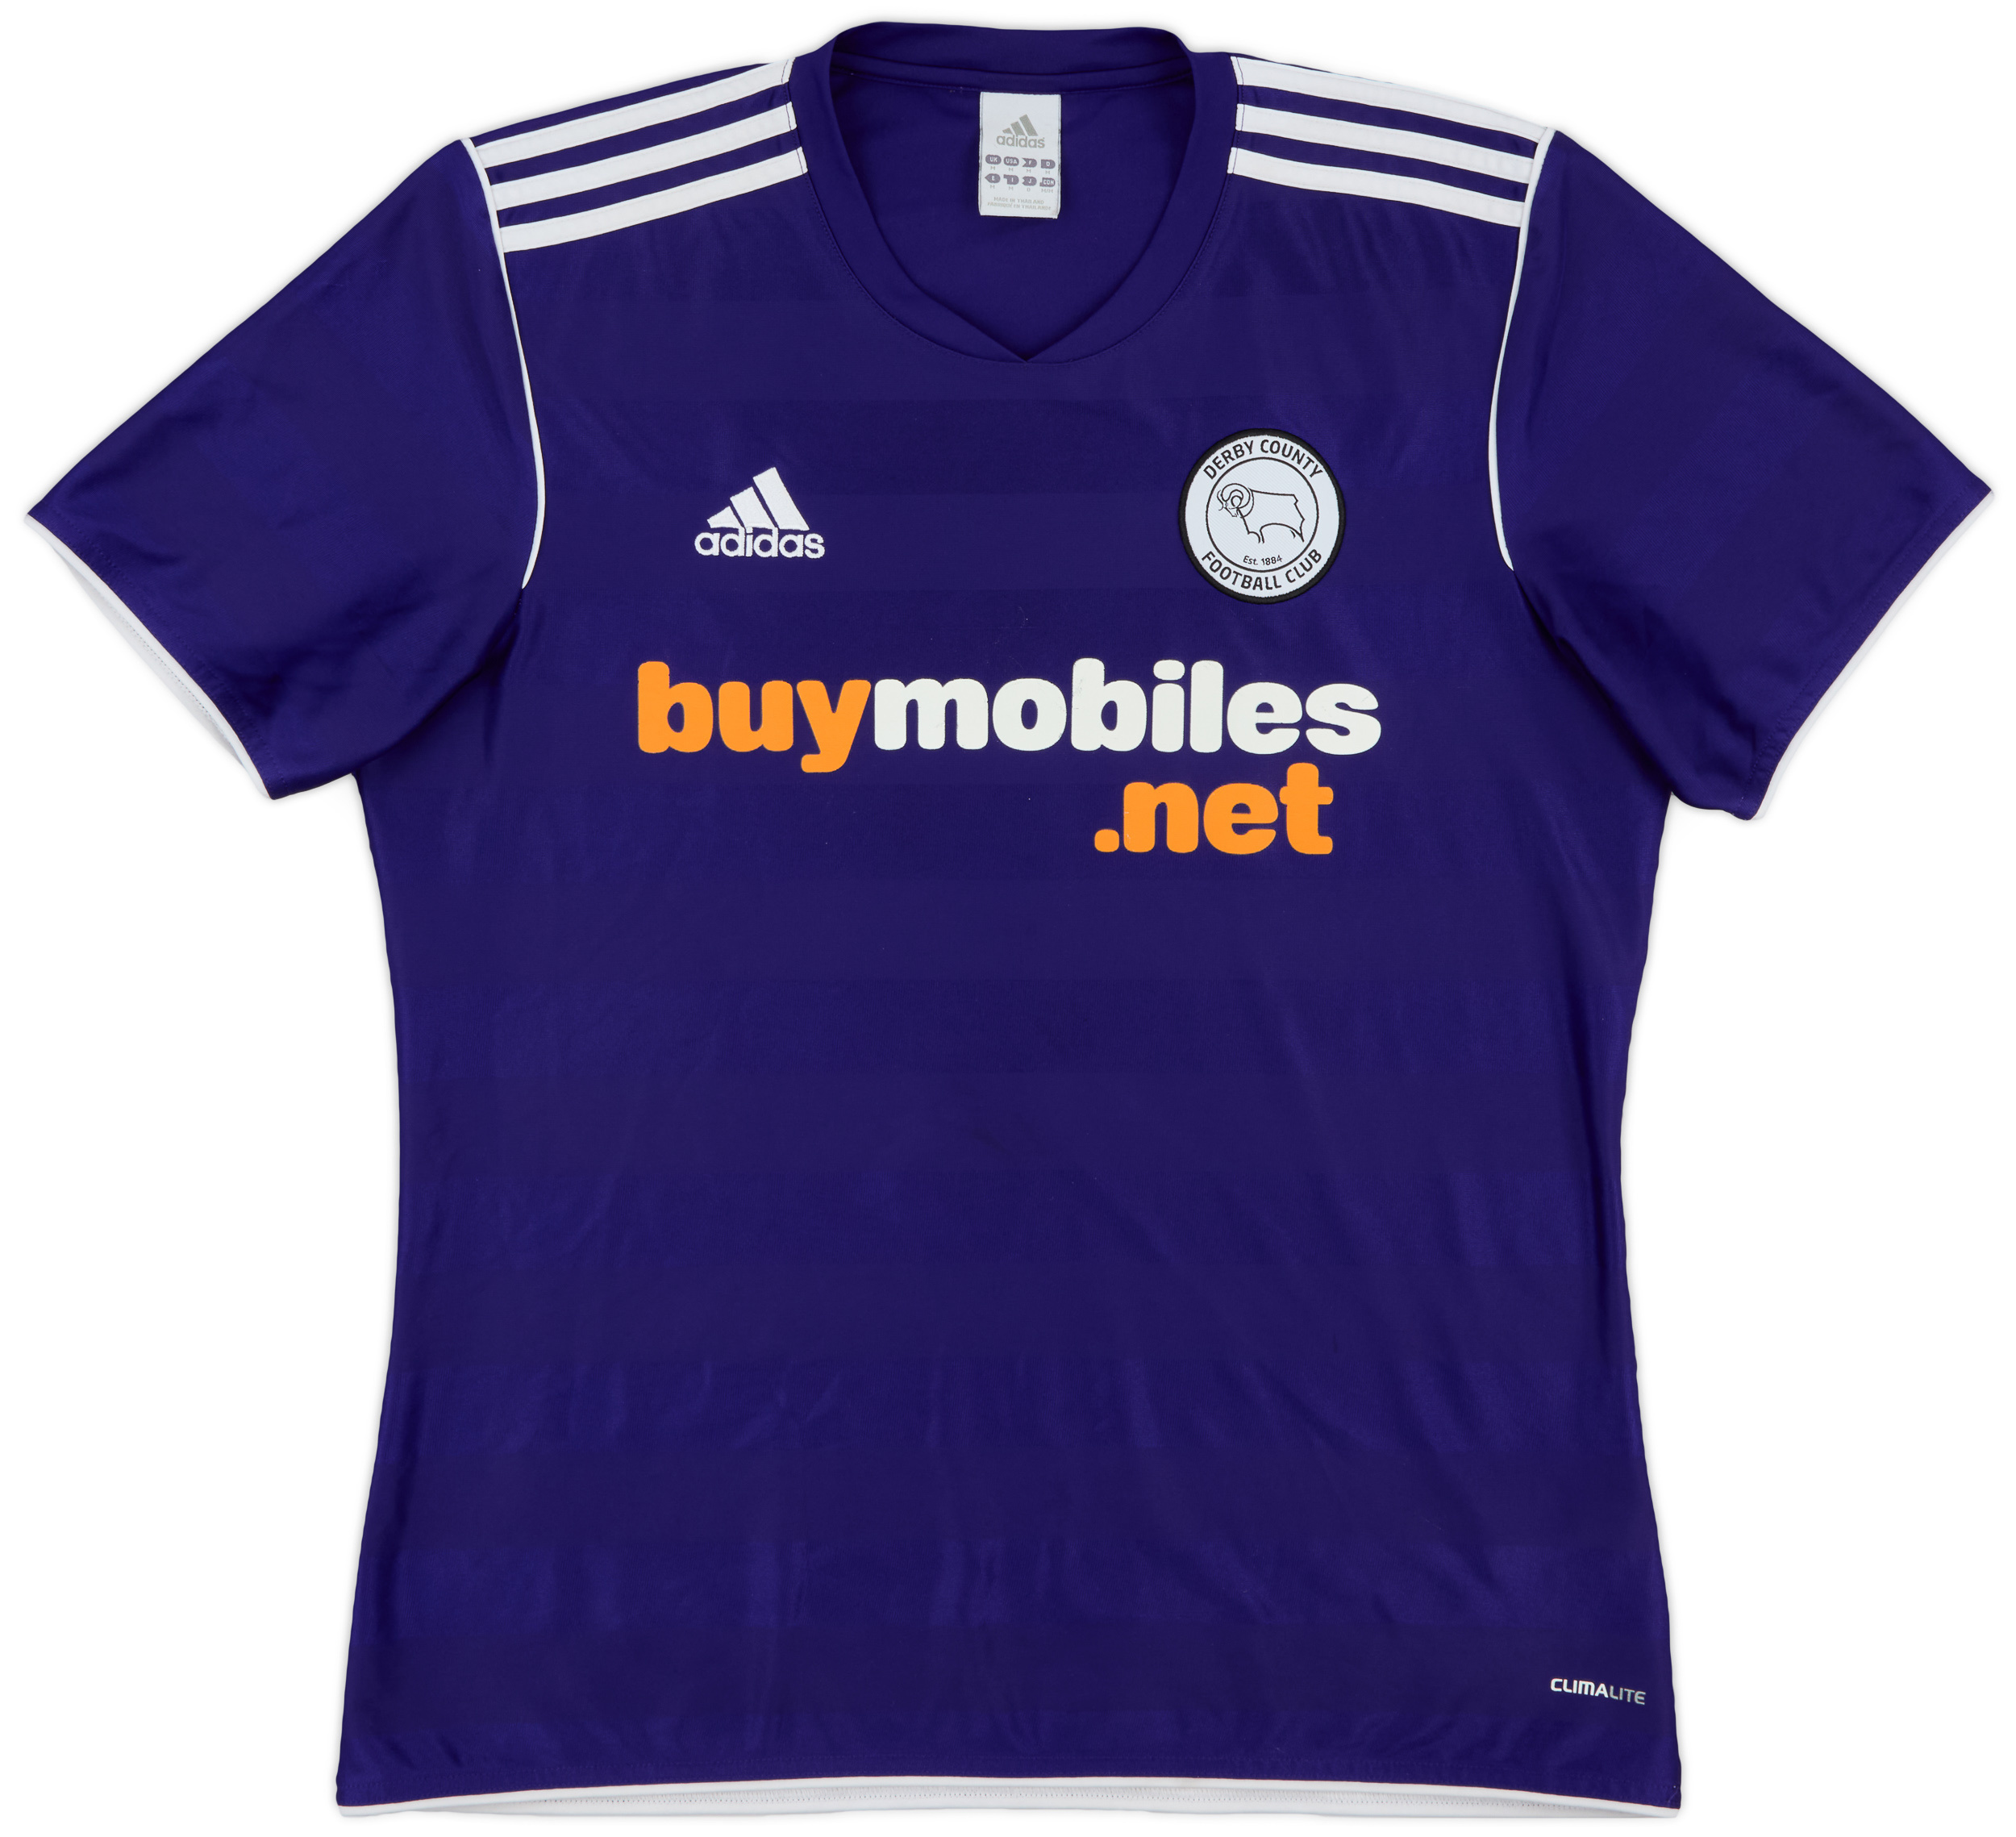 2011-12 Derby County Away Shirt - 7/10 - ()